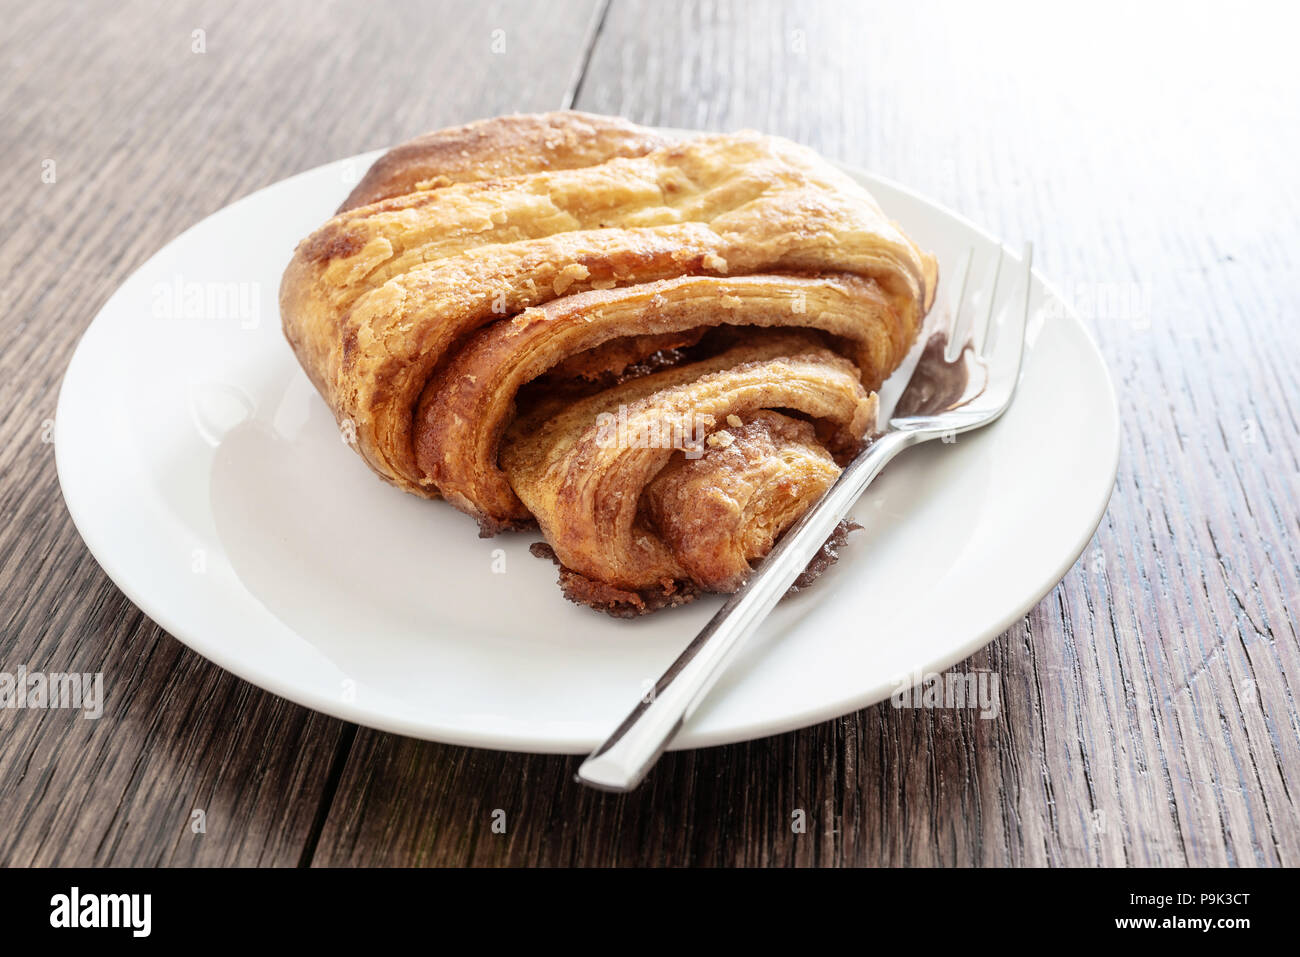 close-up shot of Franzbroetchen pastry on plate on rustic wooden table Stock Photo